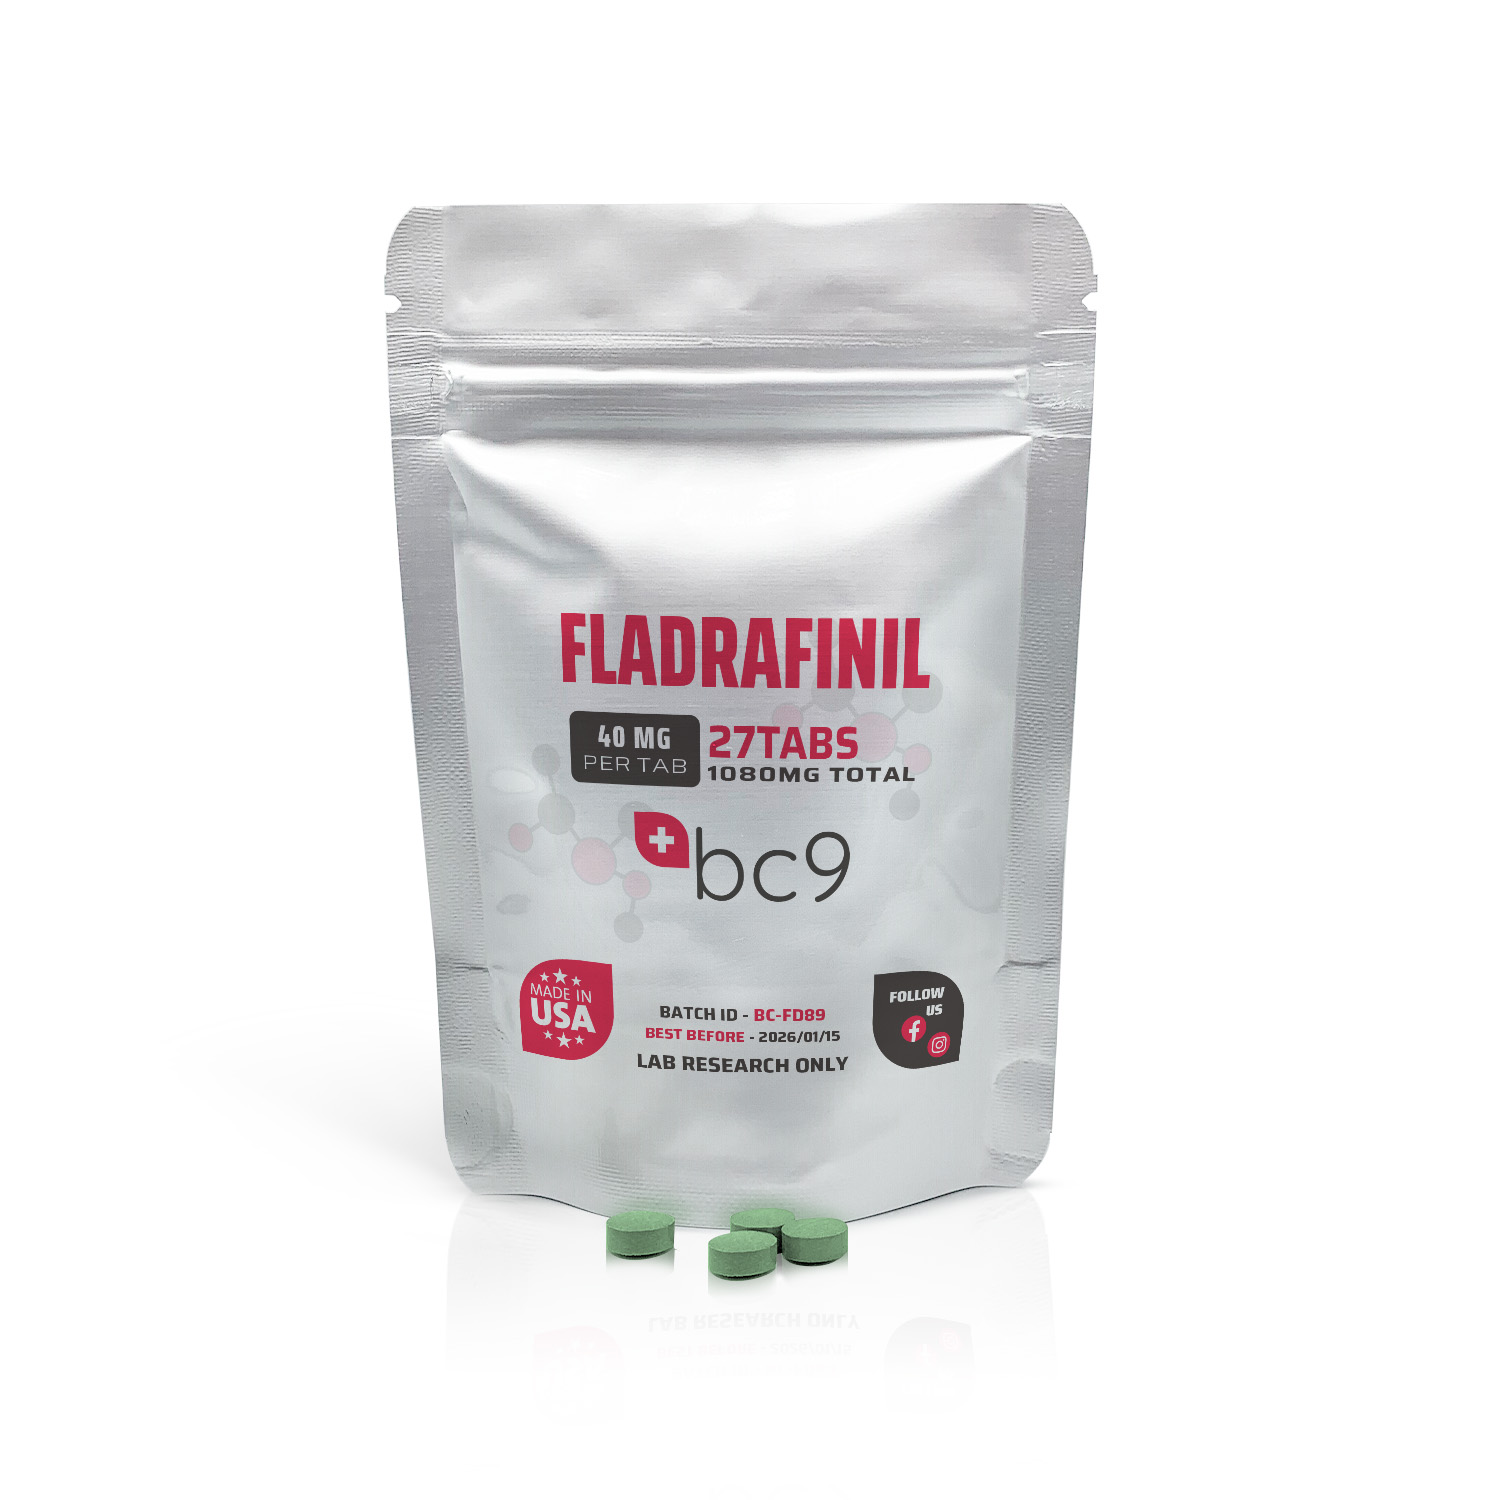 Fladrafinil Tablets For Sale | 3rd Party Tested | BC9.org